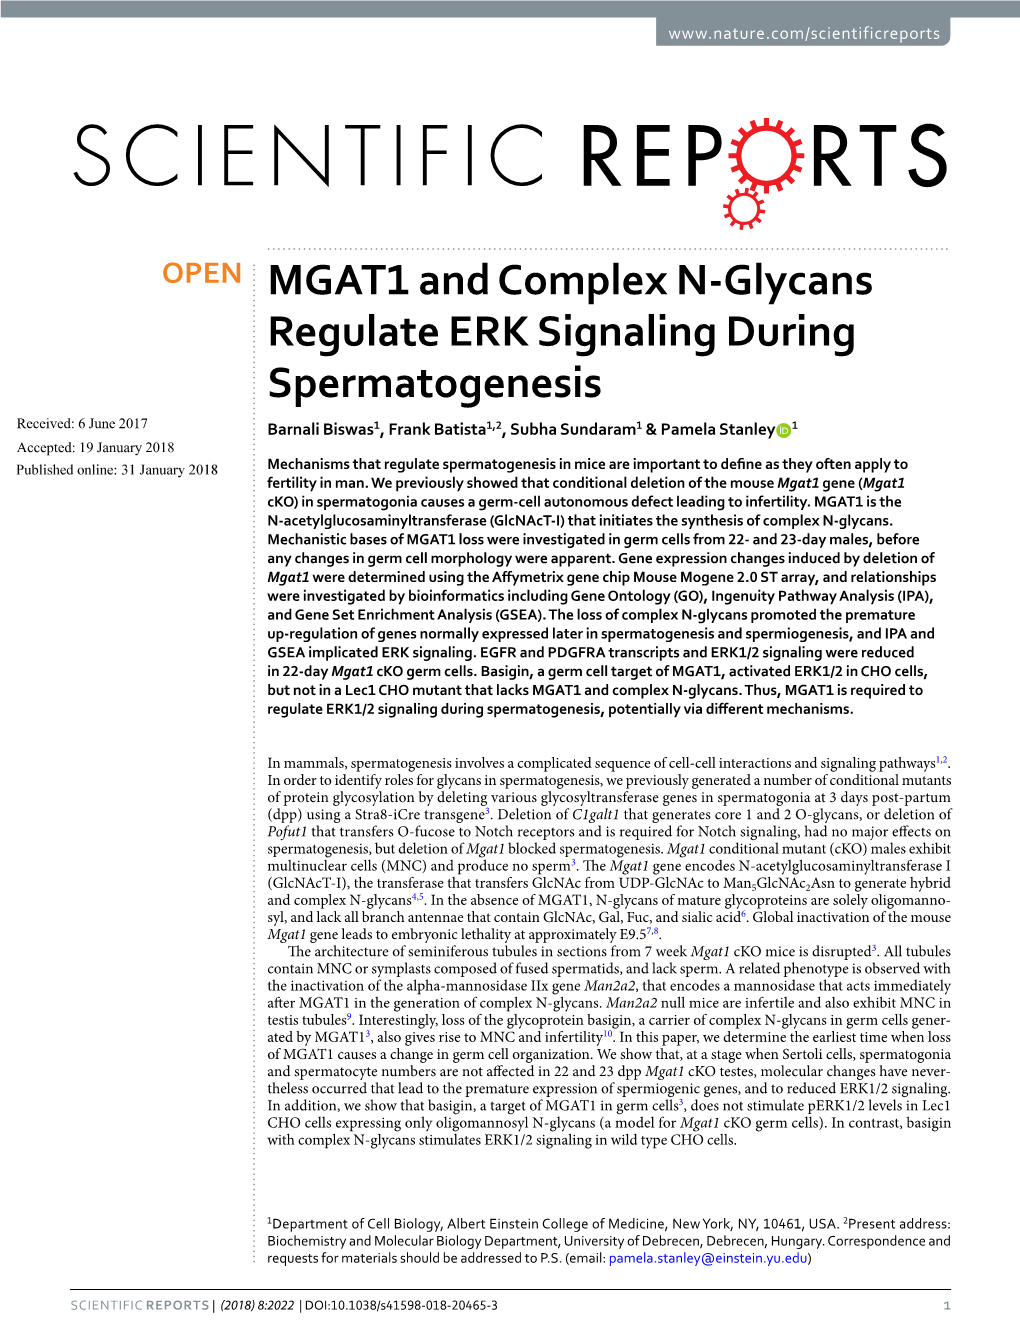 MGAT1 and Complex N-Glycans Regulate ERK Signaling